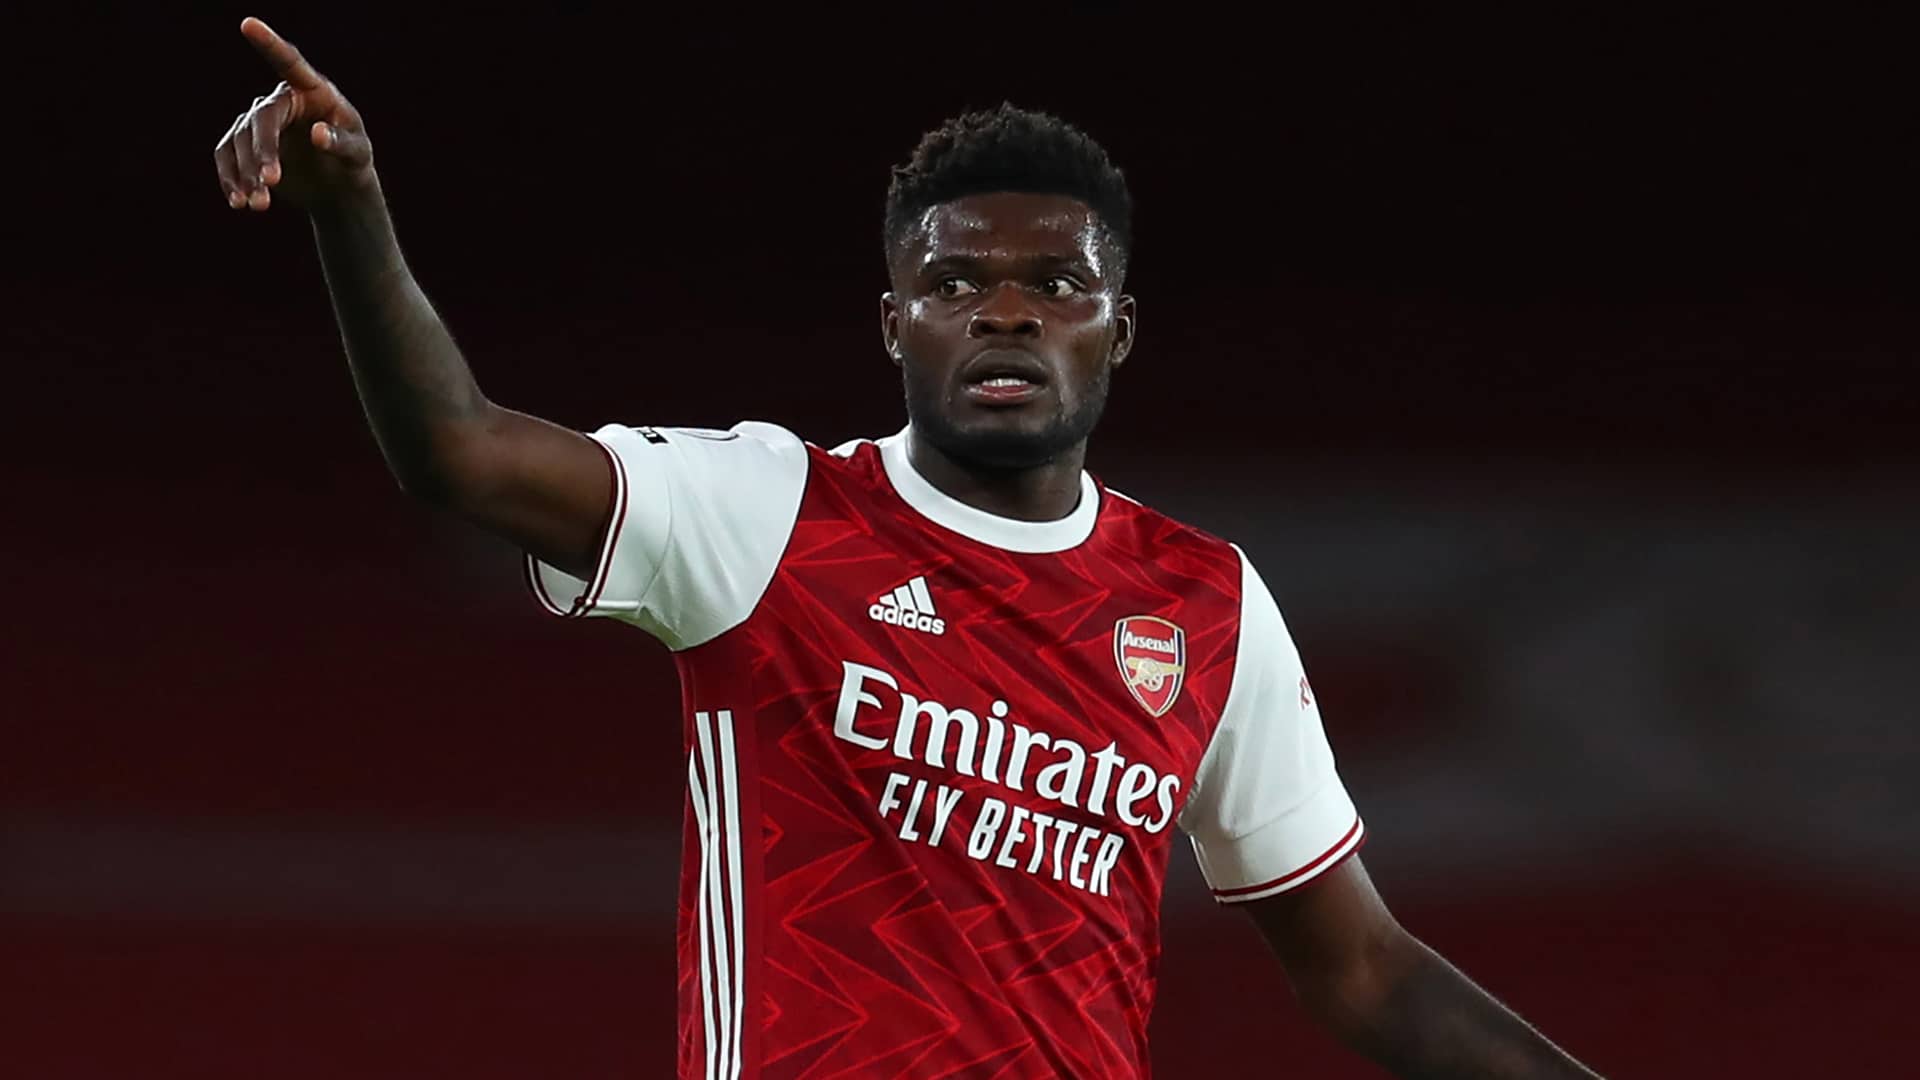 Ghana FA asks Arsenal to release Thomas Partey for further observation by medical team